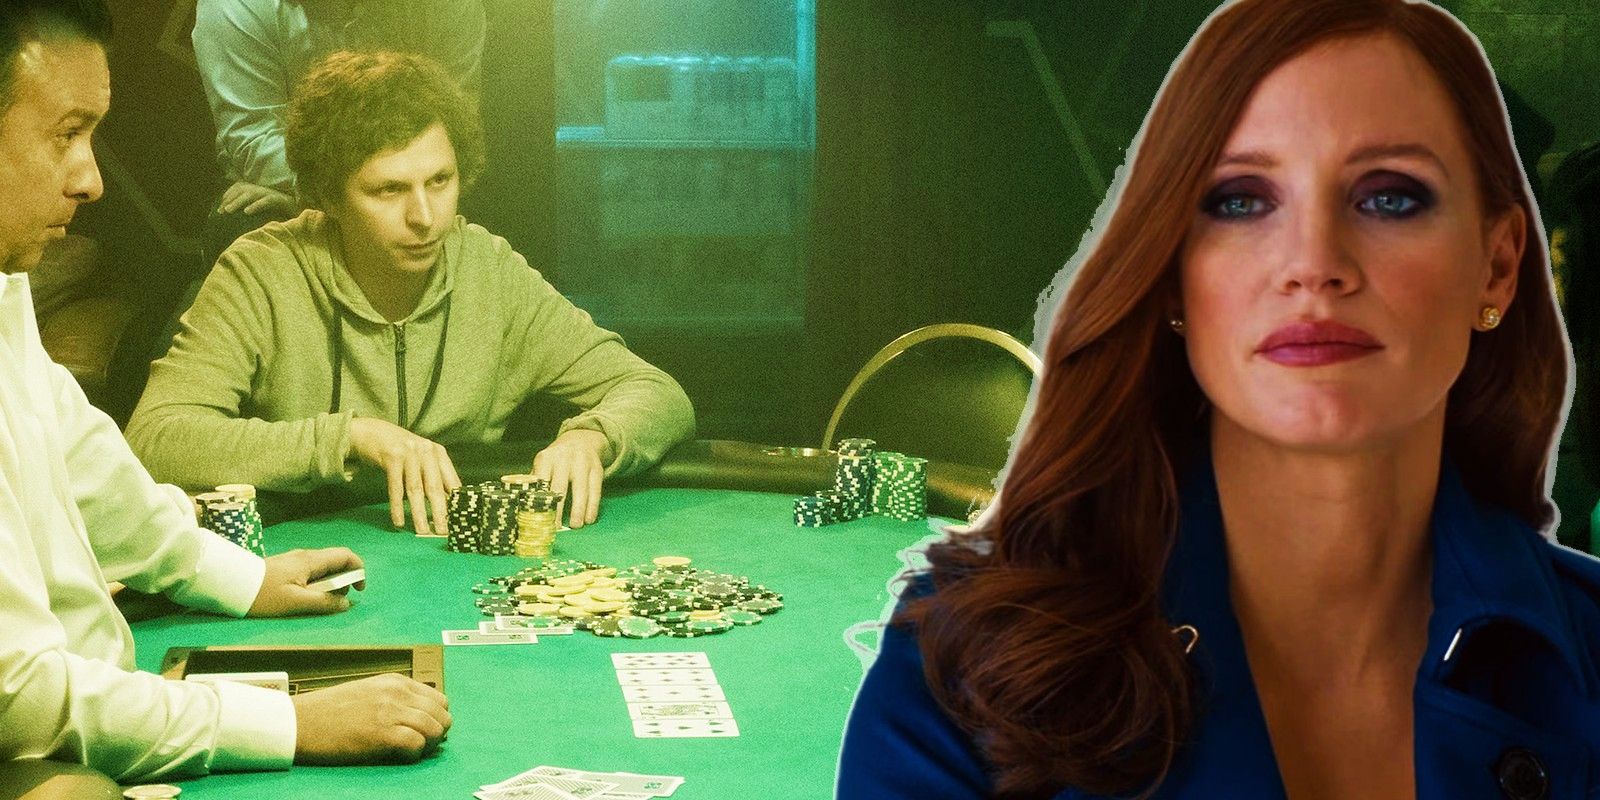 Custom image of Michael Cera as Player X and Jessican Chastain in Molly's Game